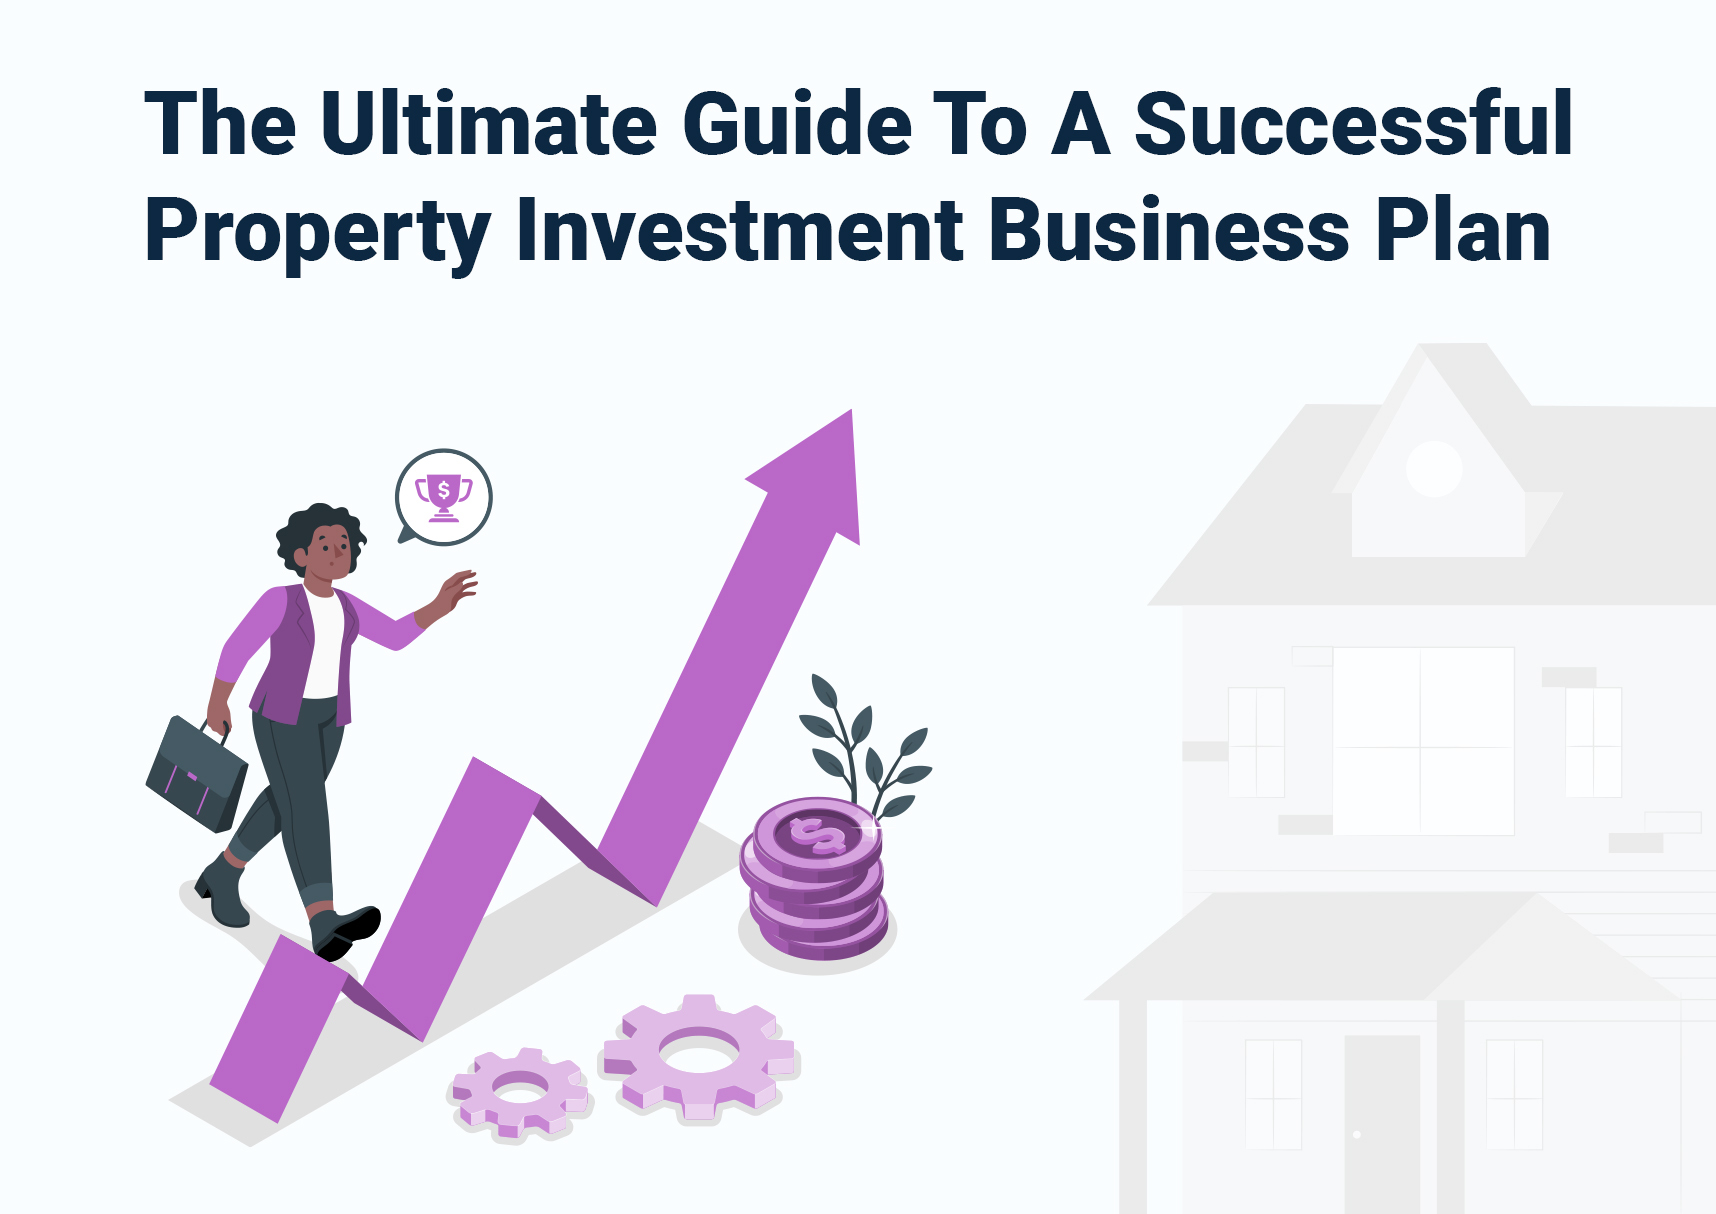 The Ultimate Guide To A Successful Property Investment Business Plan